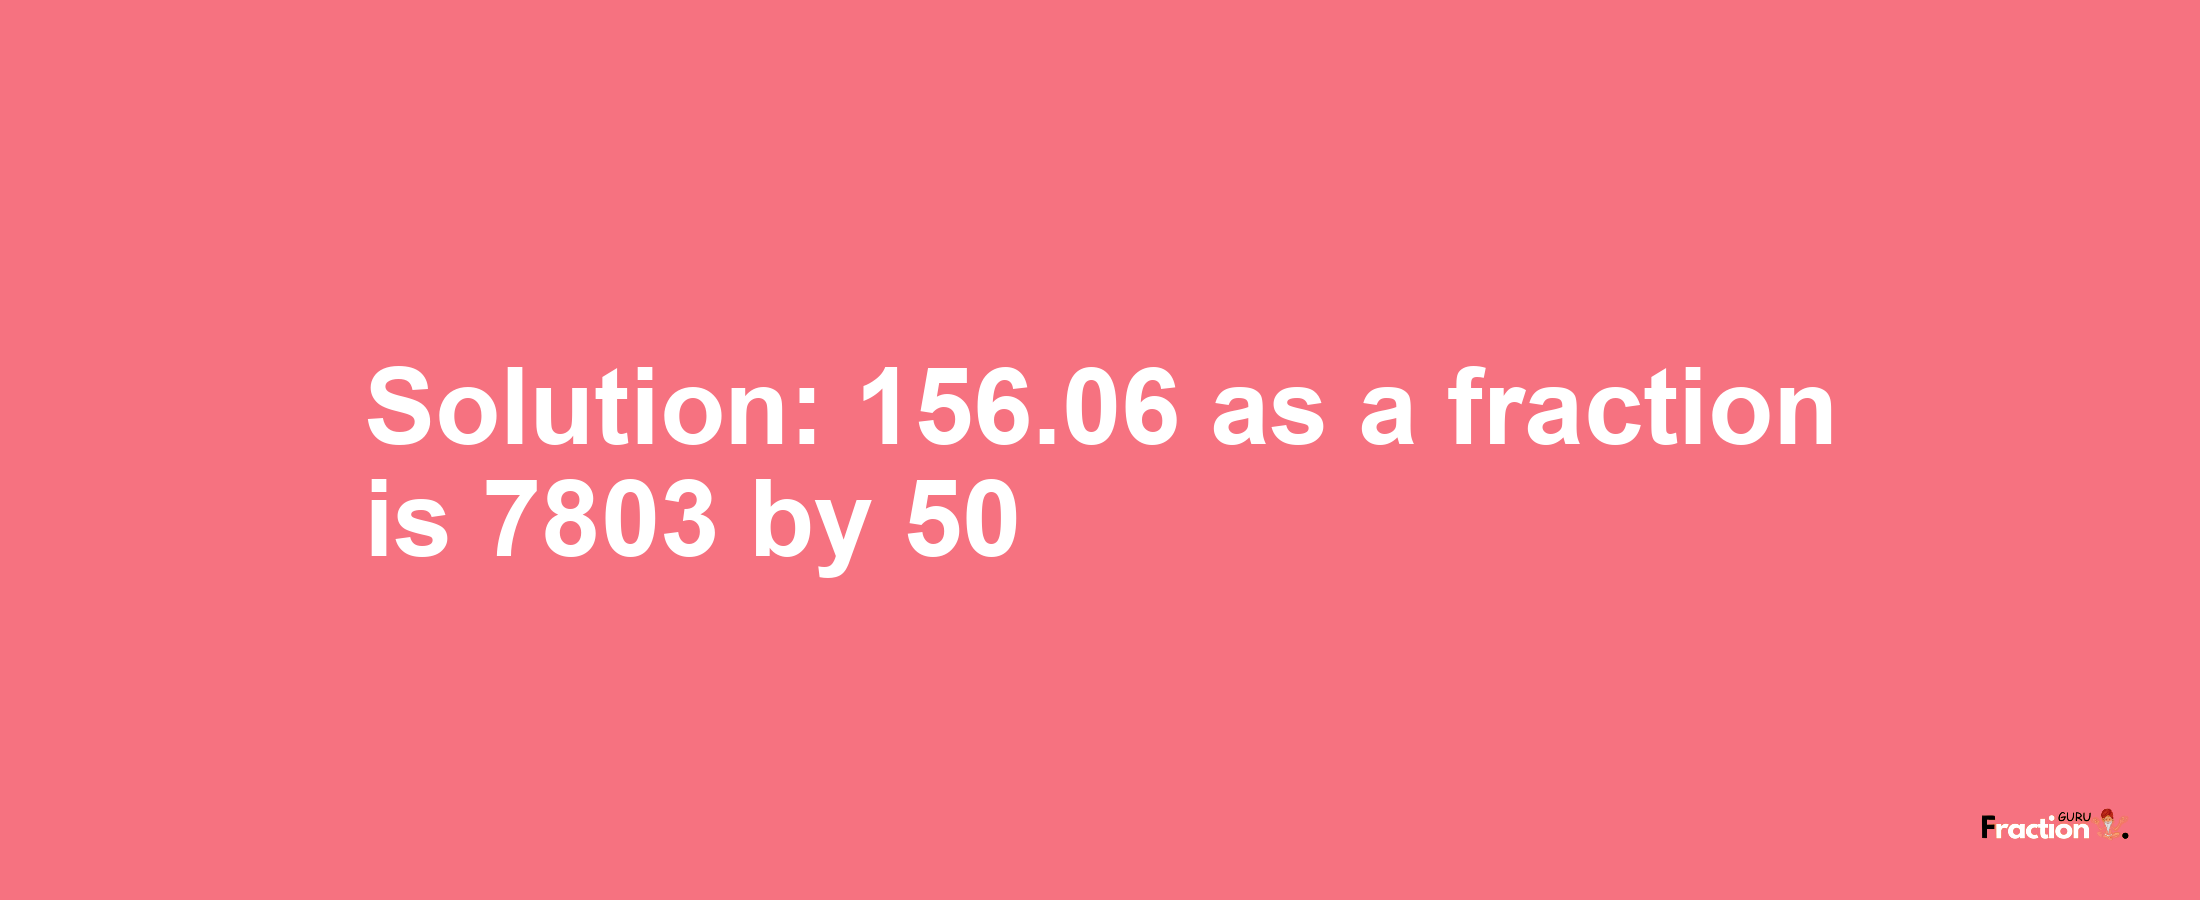 Solution:156.06 as a fraction is 7803/50